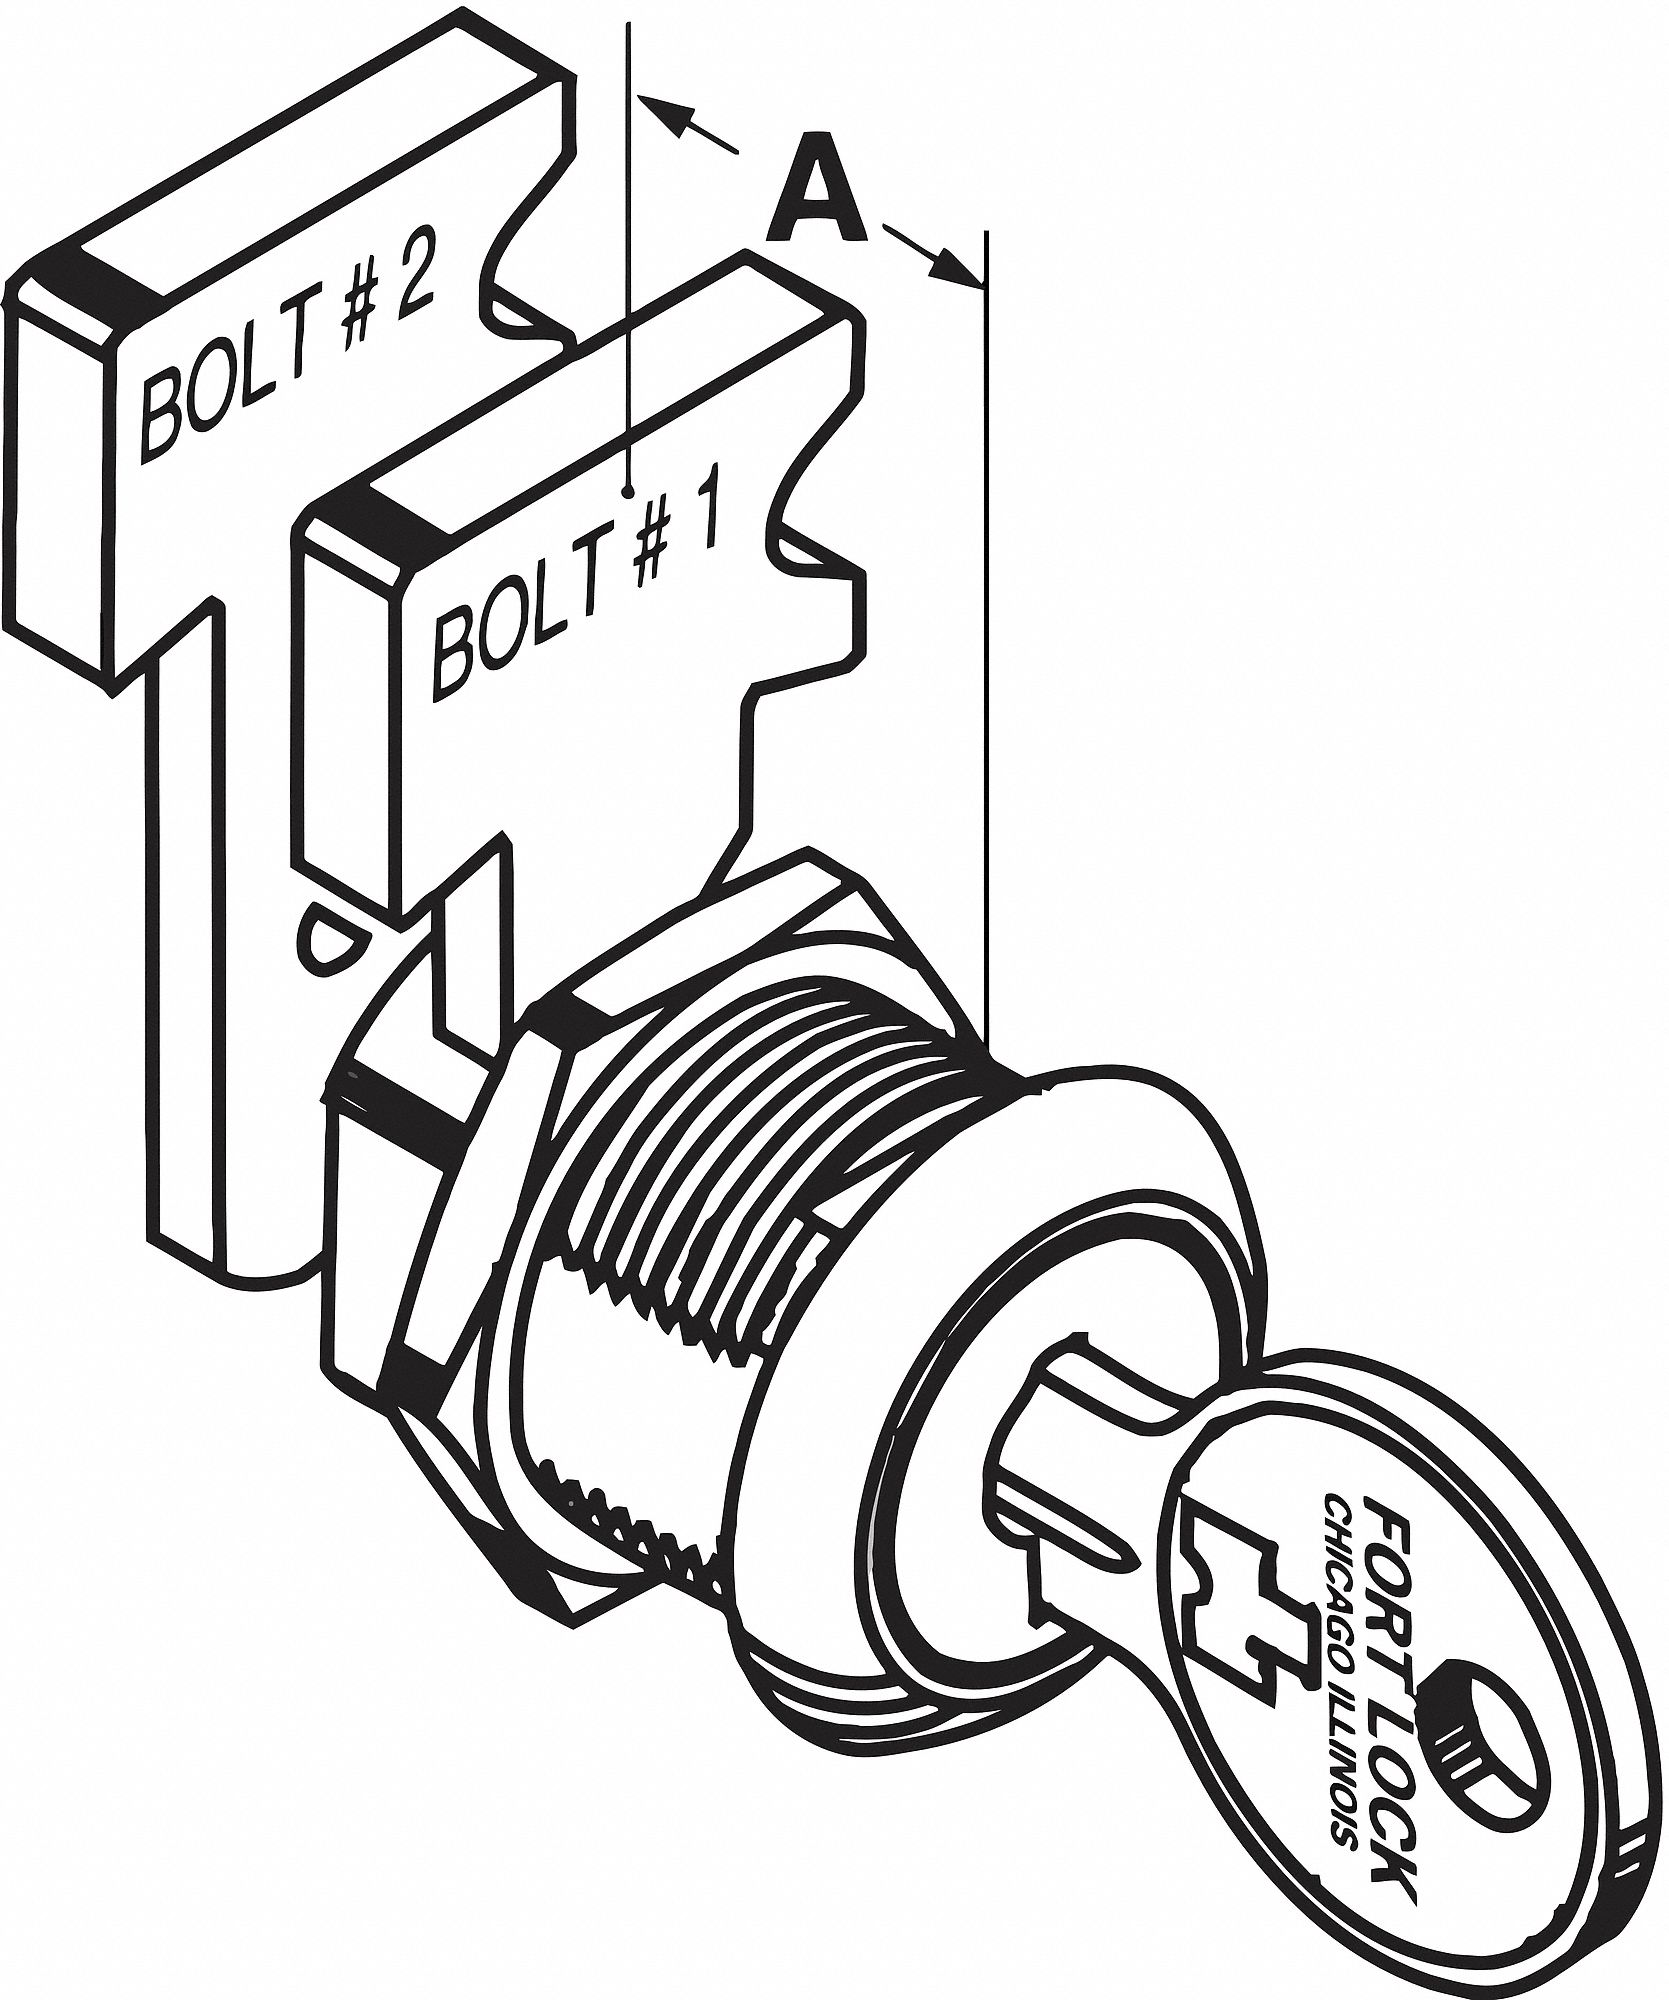 Cabinet and Drawer Dead Bolt Locks: For 1/2 in Material Thick, 3/4 in Mounting Hole Dia.